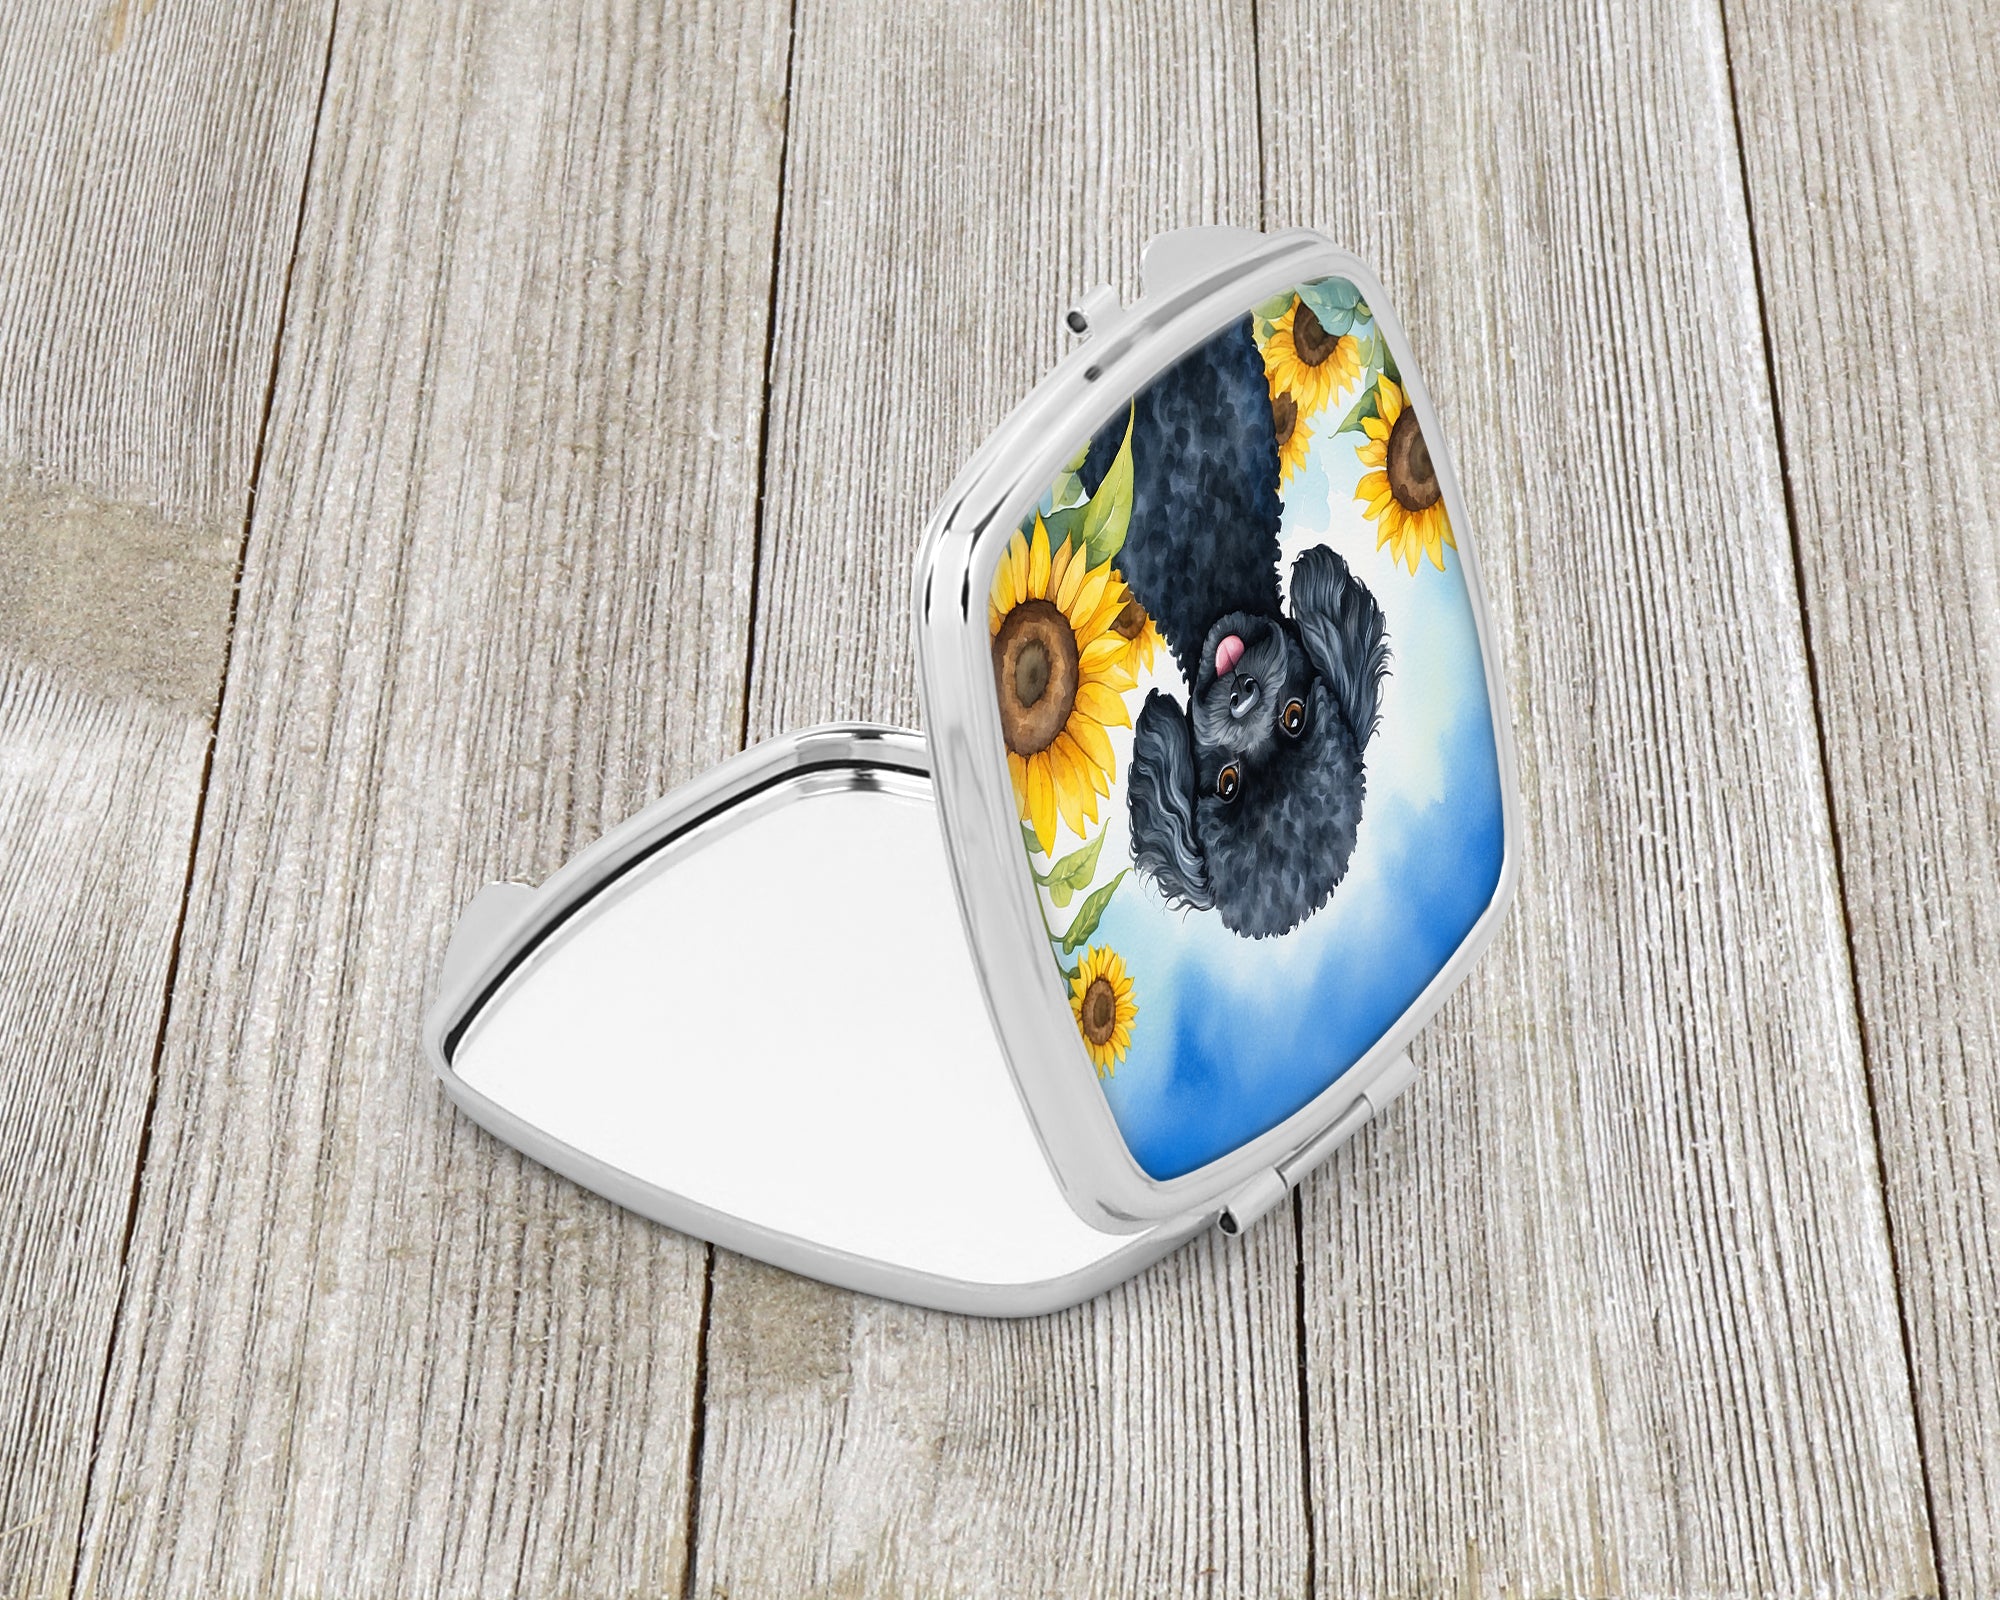 Buy this Black Poodle in Sunflowers Compact Mirror